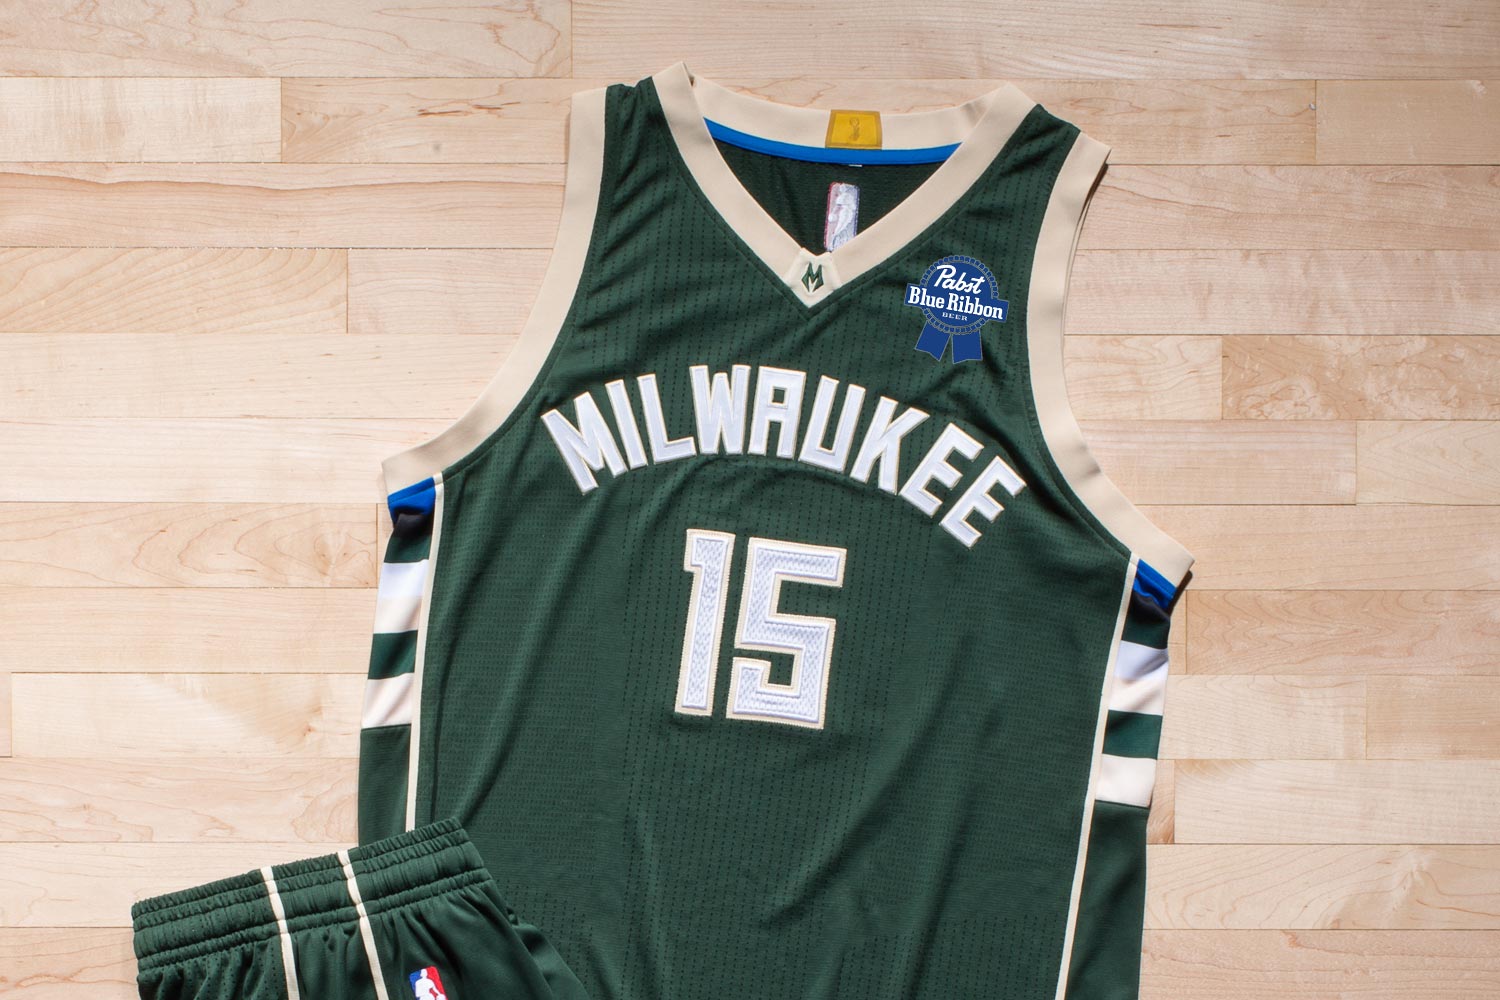 Bucks Lead on X: A year ago today, Motorola became the Bucks' new jersey  sponsor. Which do you like better: Motorola or Harley Davidson?   / X